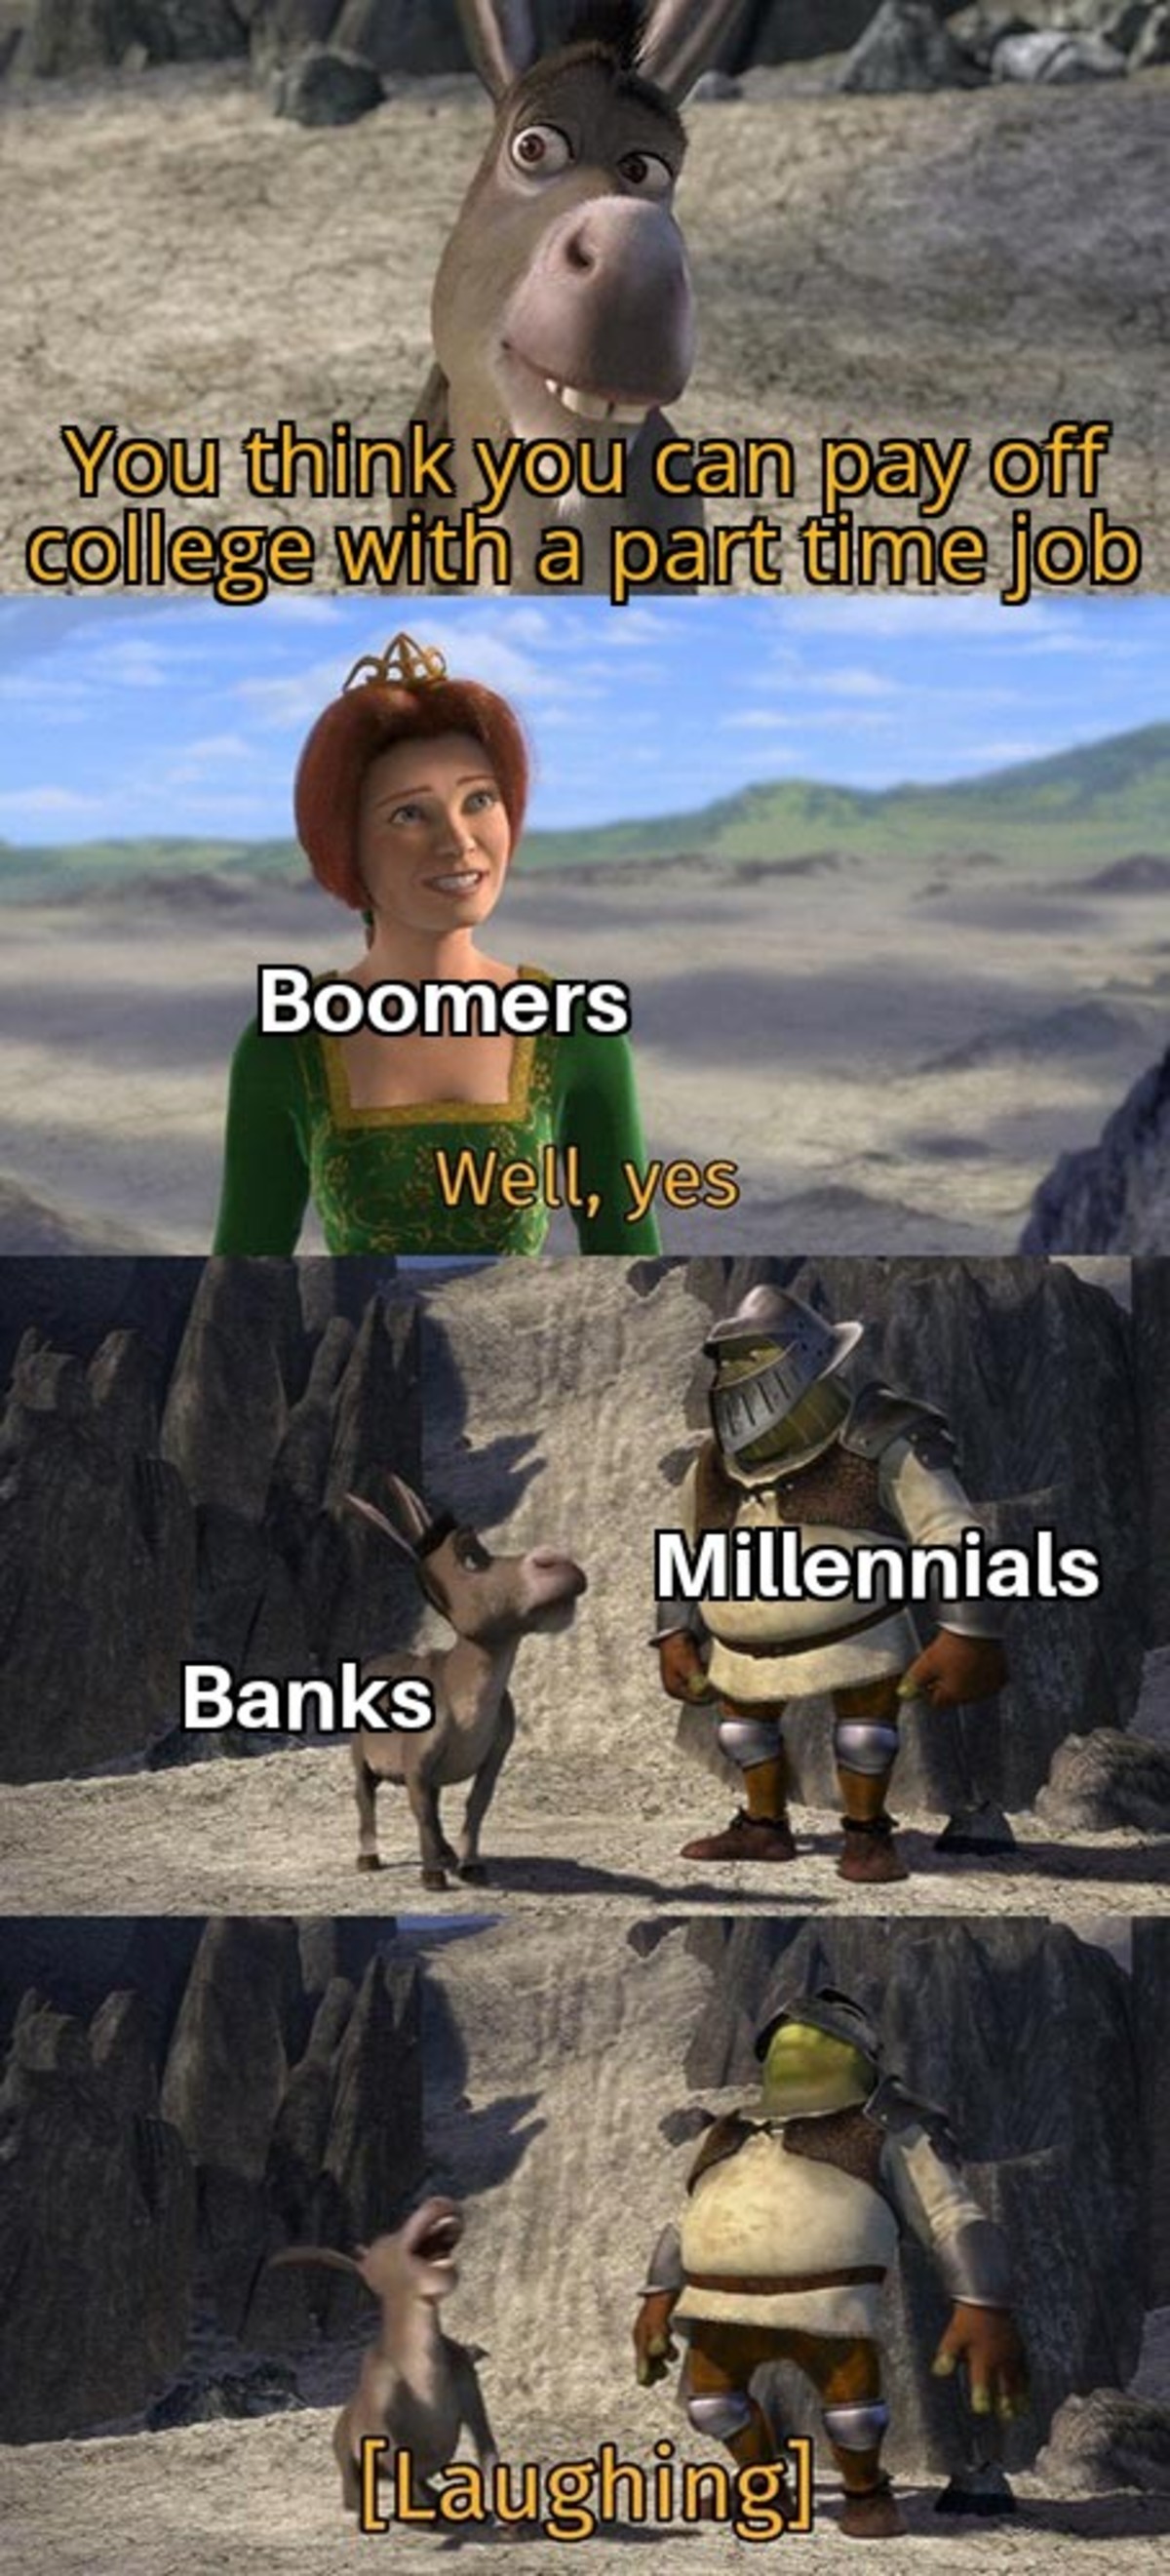 well yes shrek meme - You think you can pay off college with a part time job Boomers Well, yes Millennials Banks Laughingl